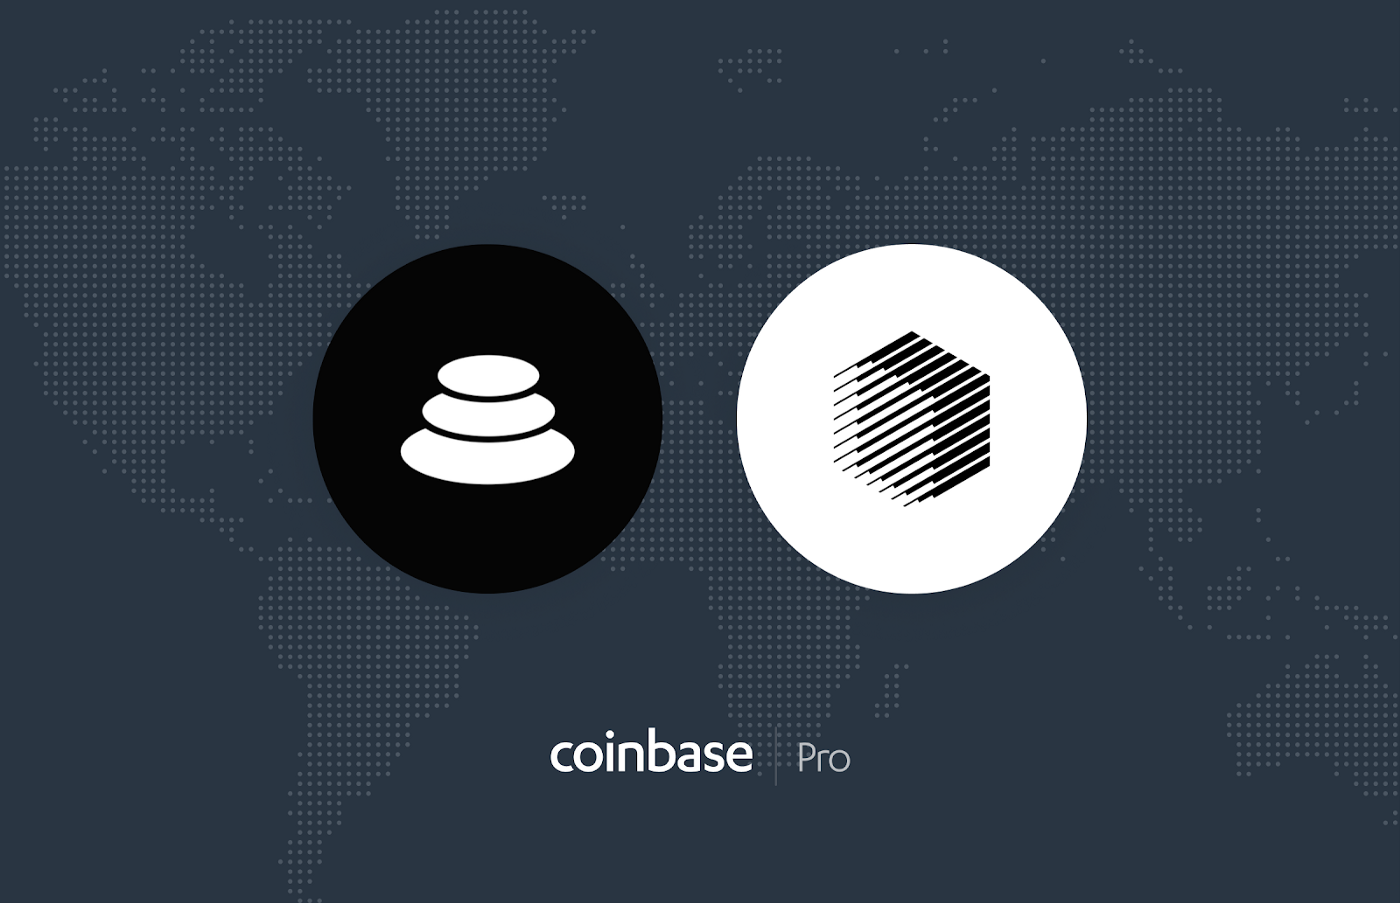 Balancer (BAL) and Ren (REN) are launching on Coinbase Pro